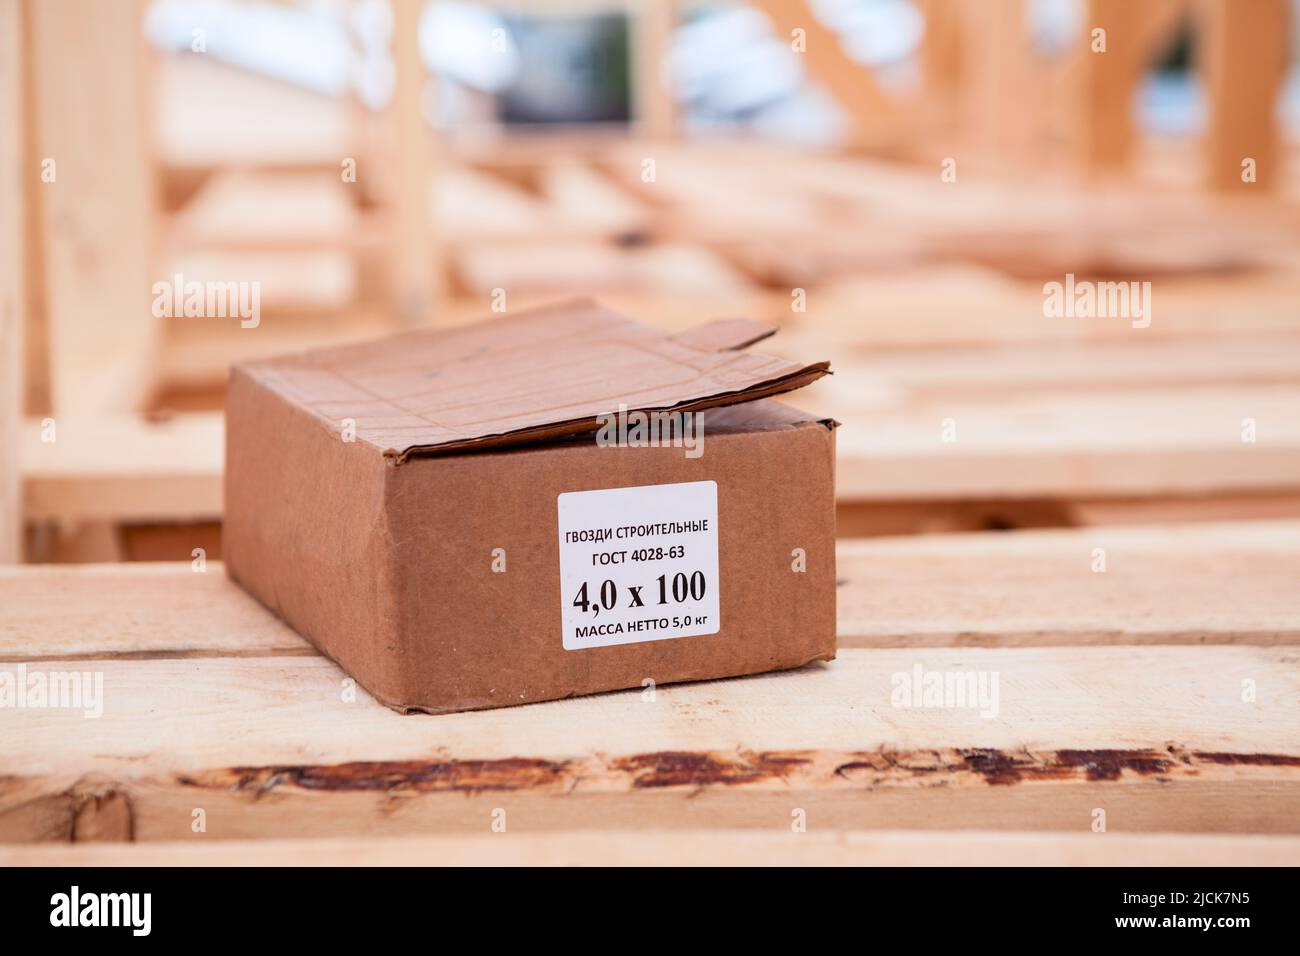 Box of construction nails, 5 kg marking sticker, Russian Stock Photo